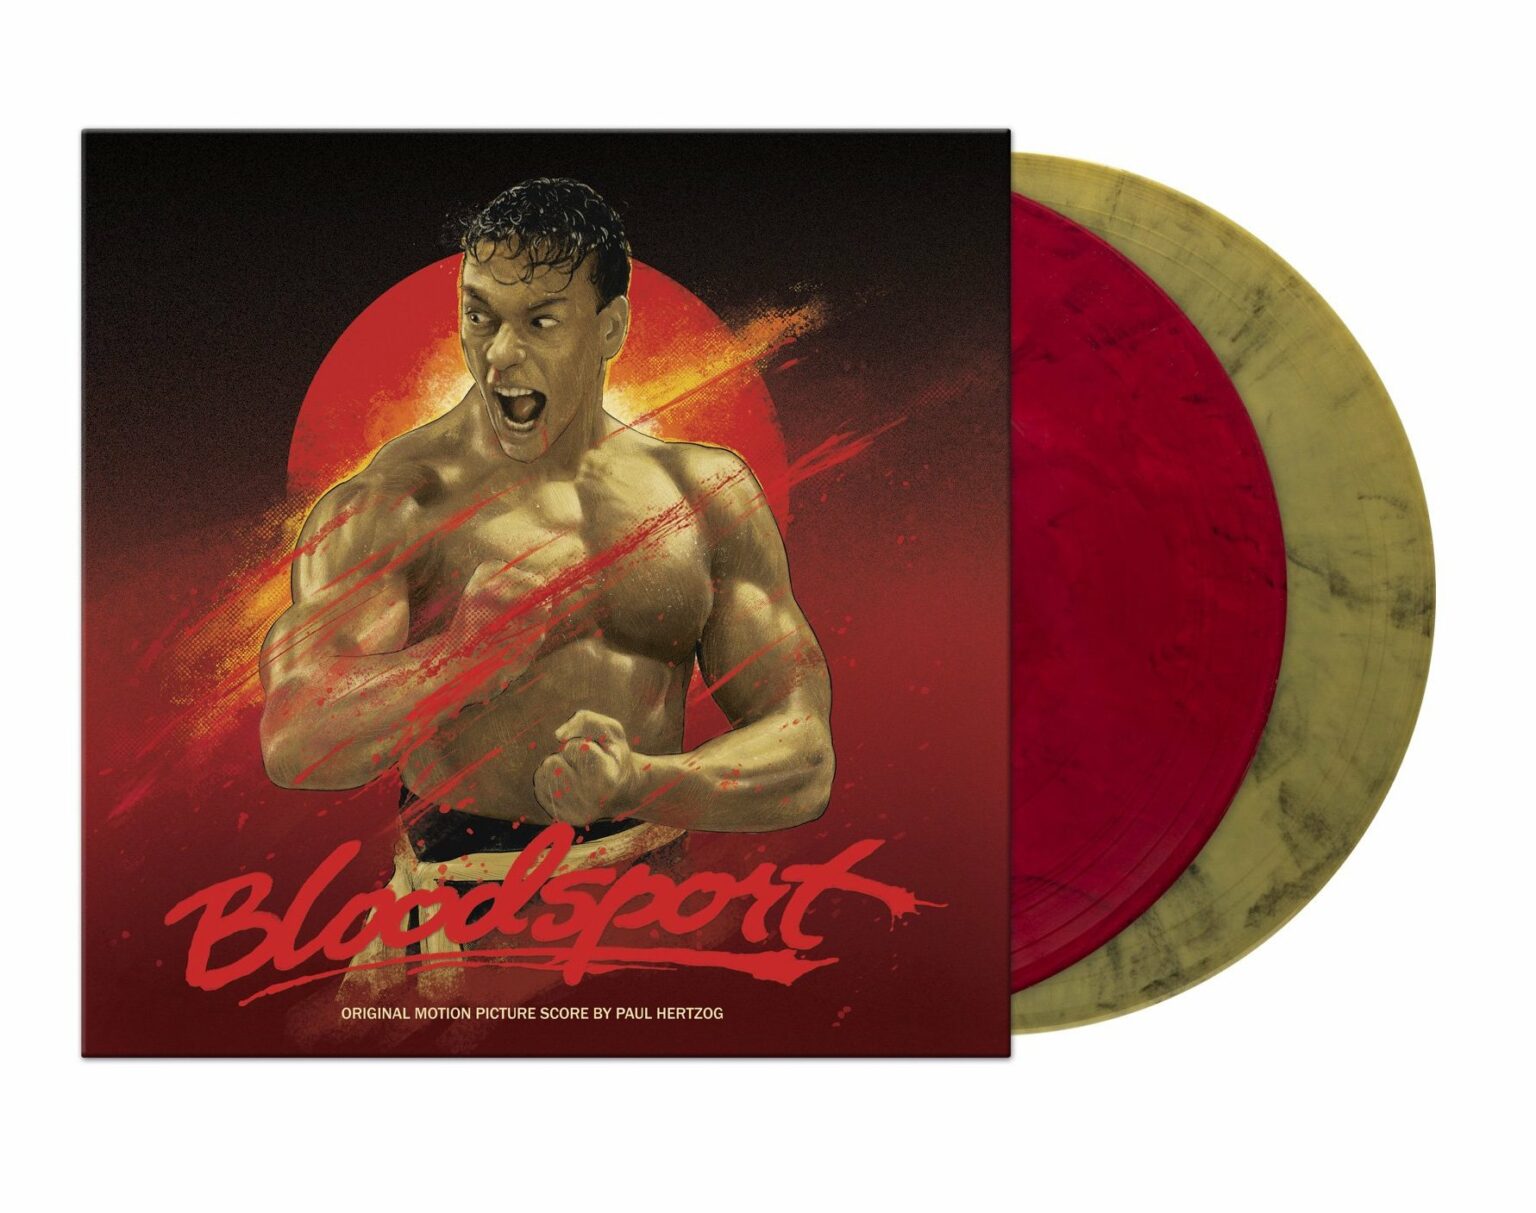 Waxwork Records has released the 'Bloodsport OST' on Vinyl